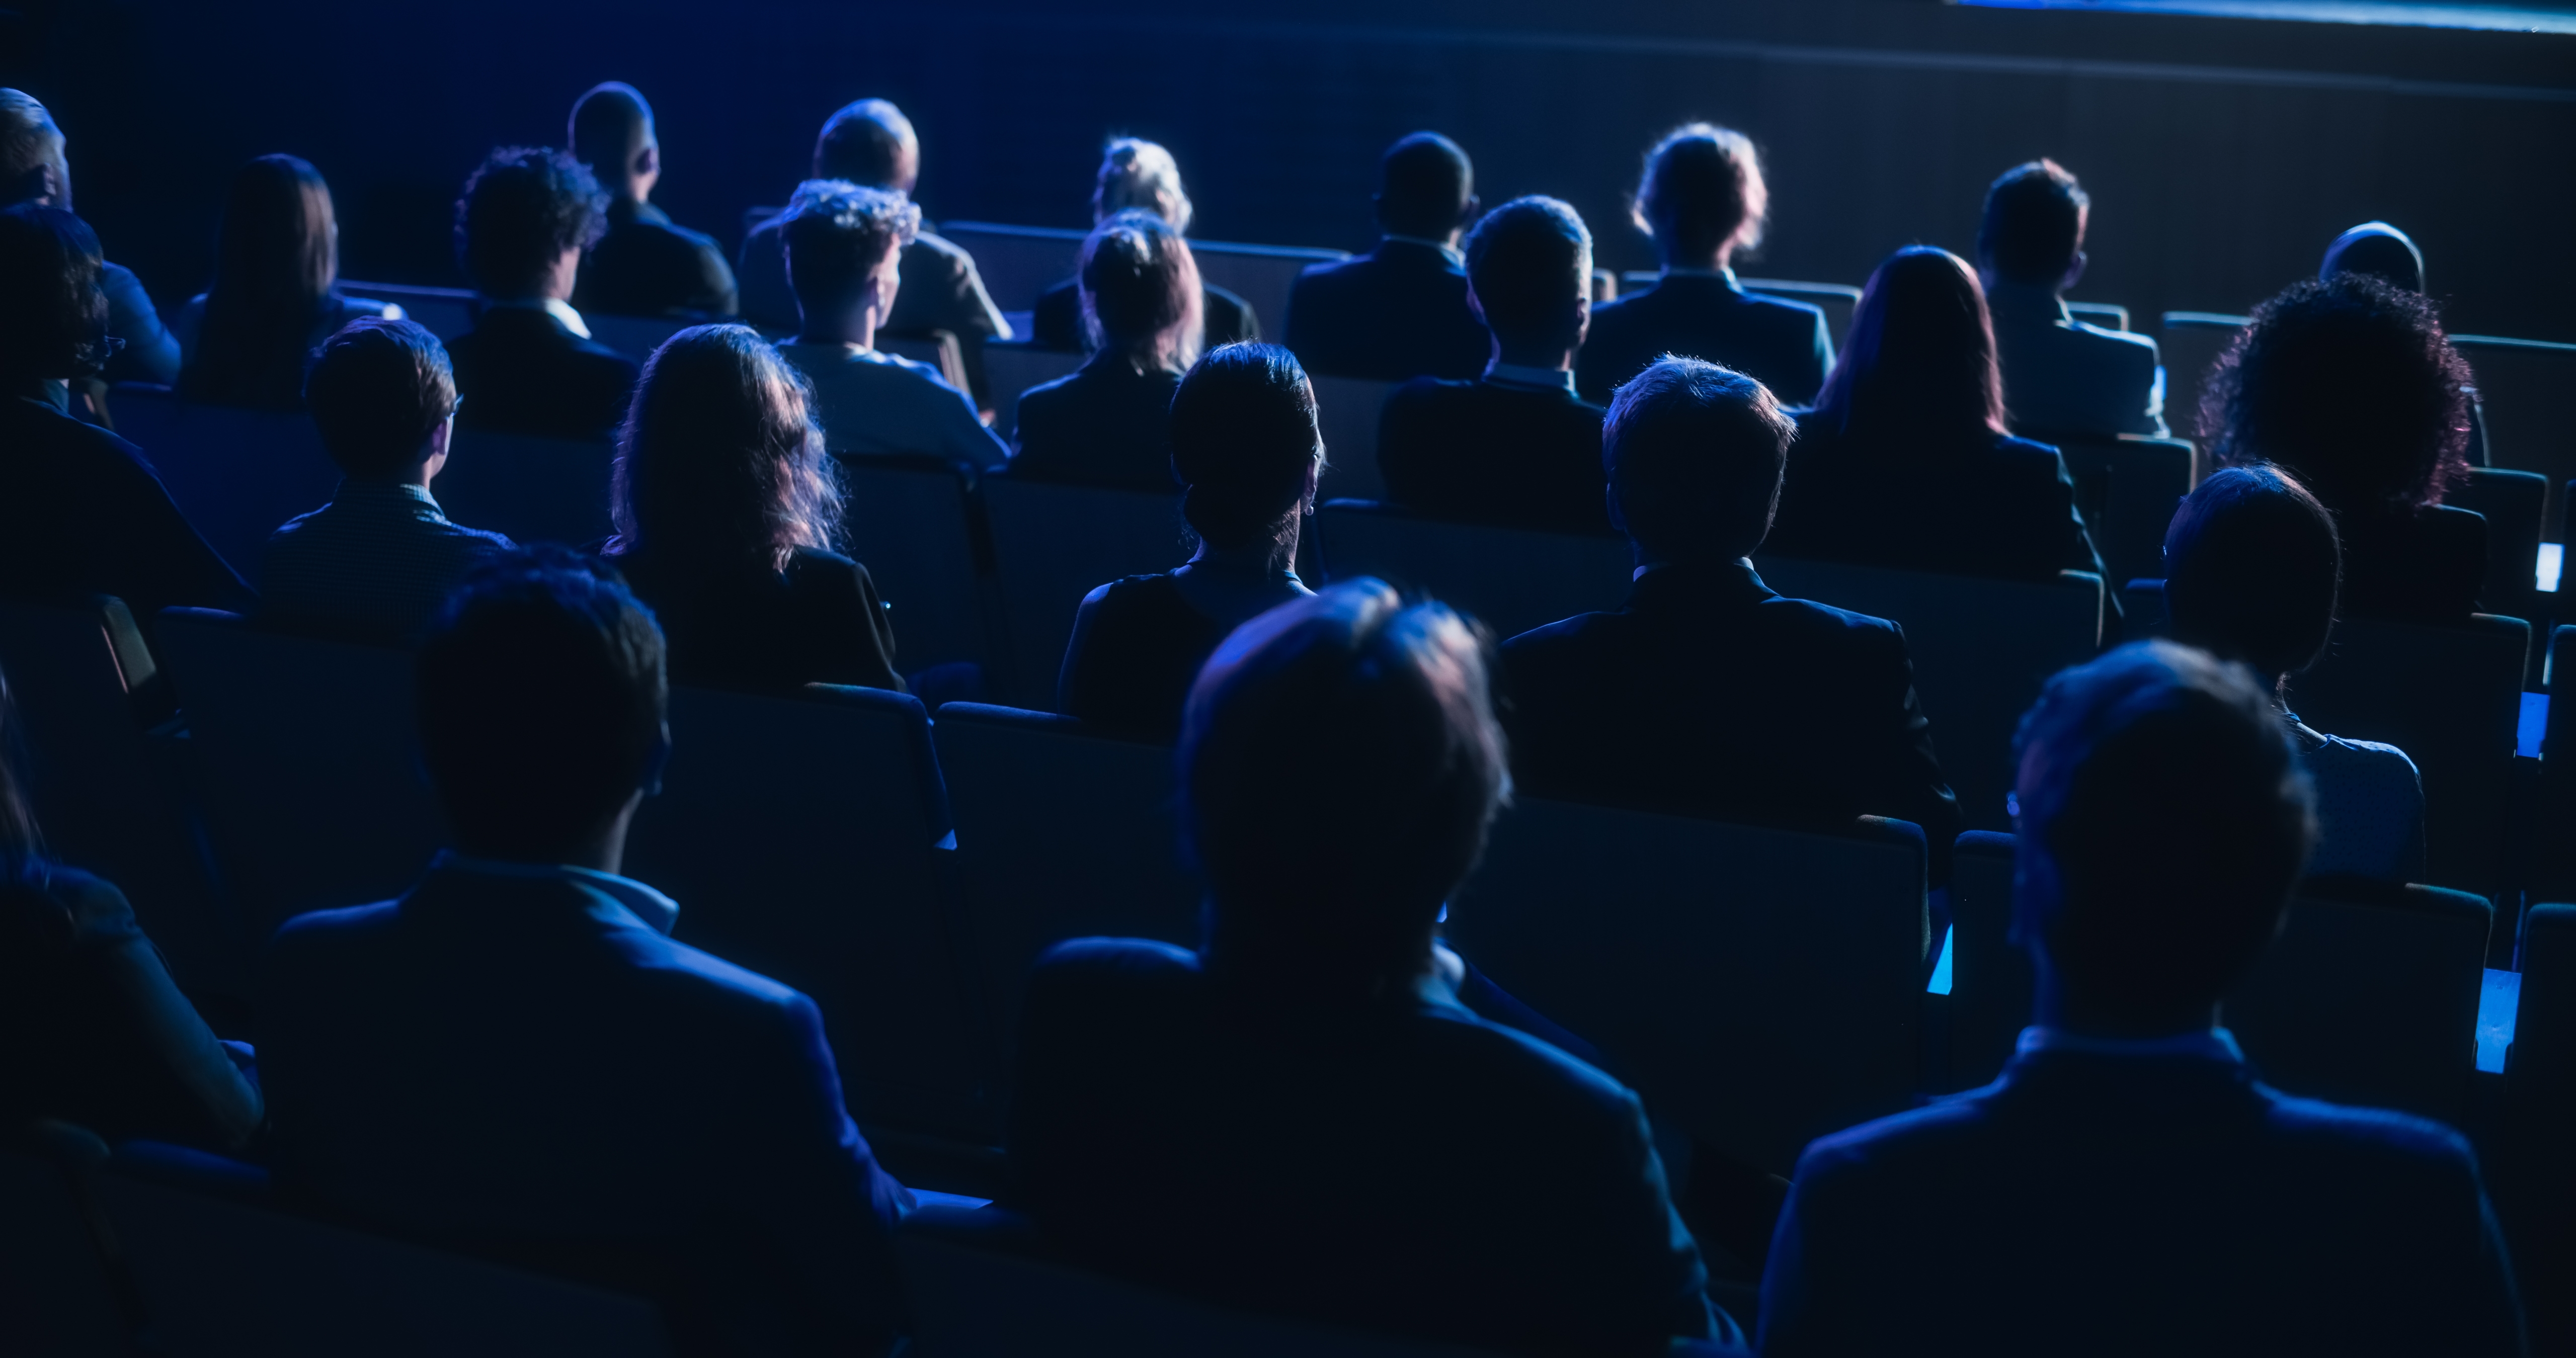 Audience Full of Tech People | Source: Shutterstock